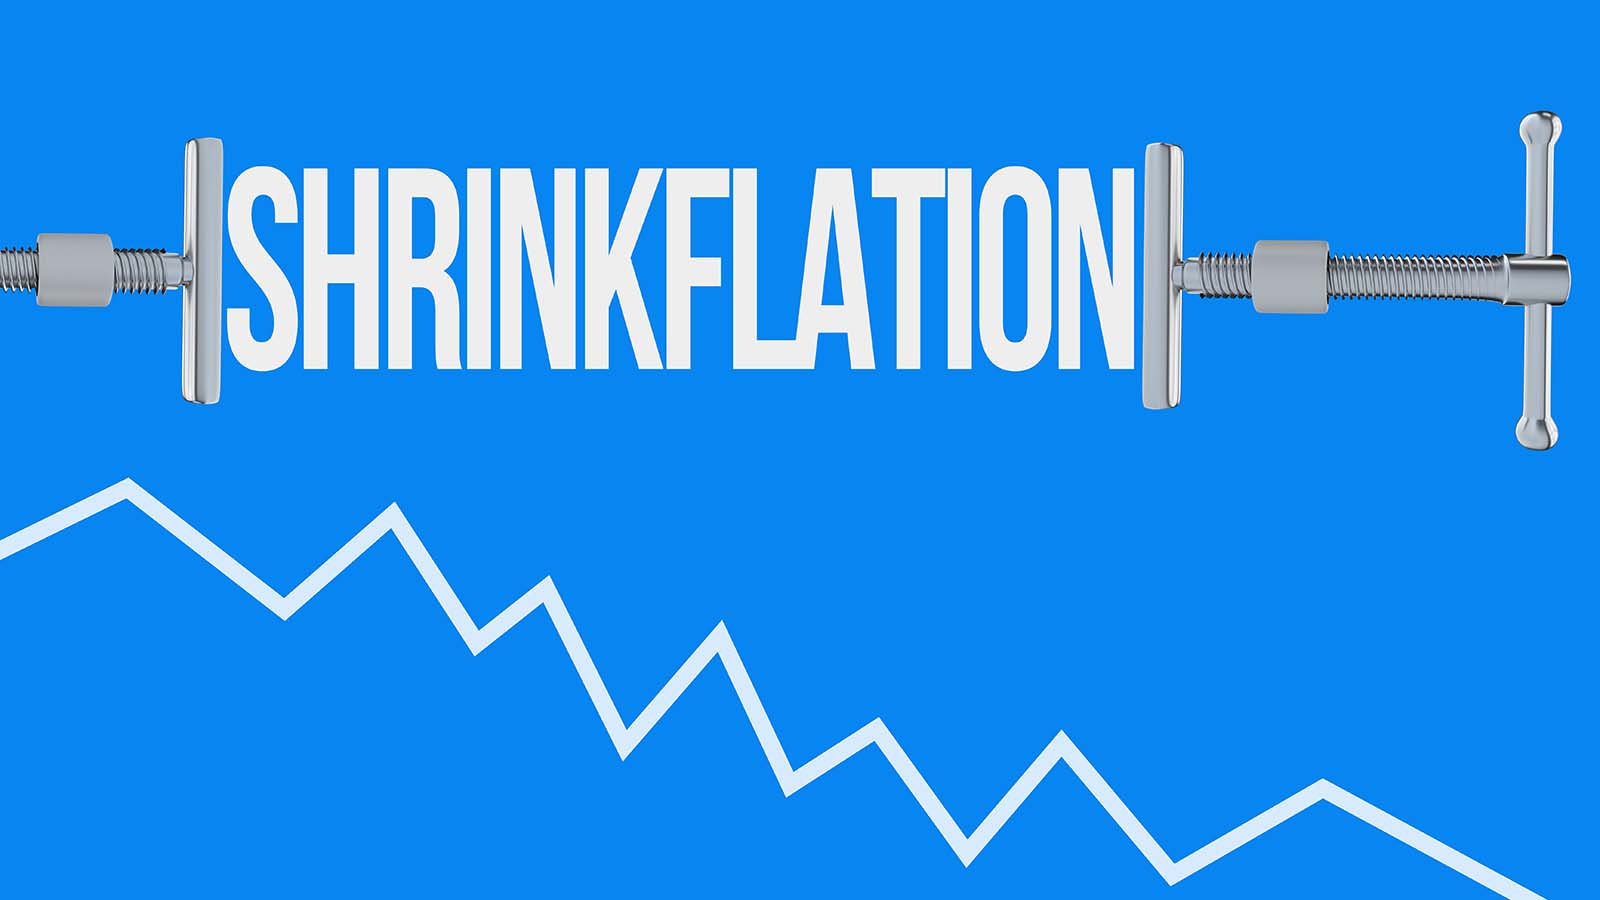 A concept image showing the phrase "Shrinkflation"